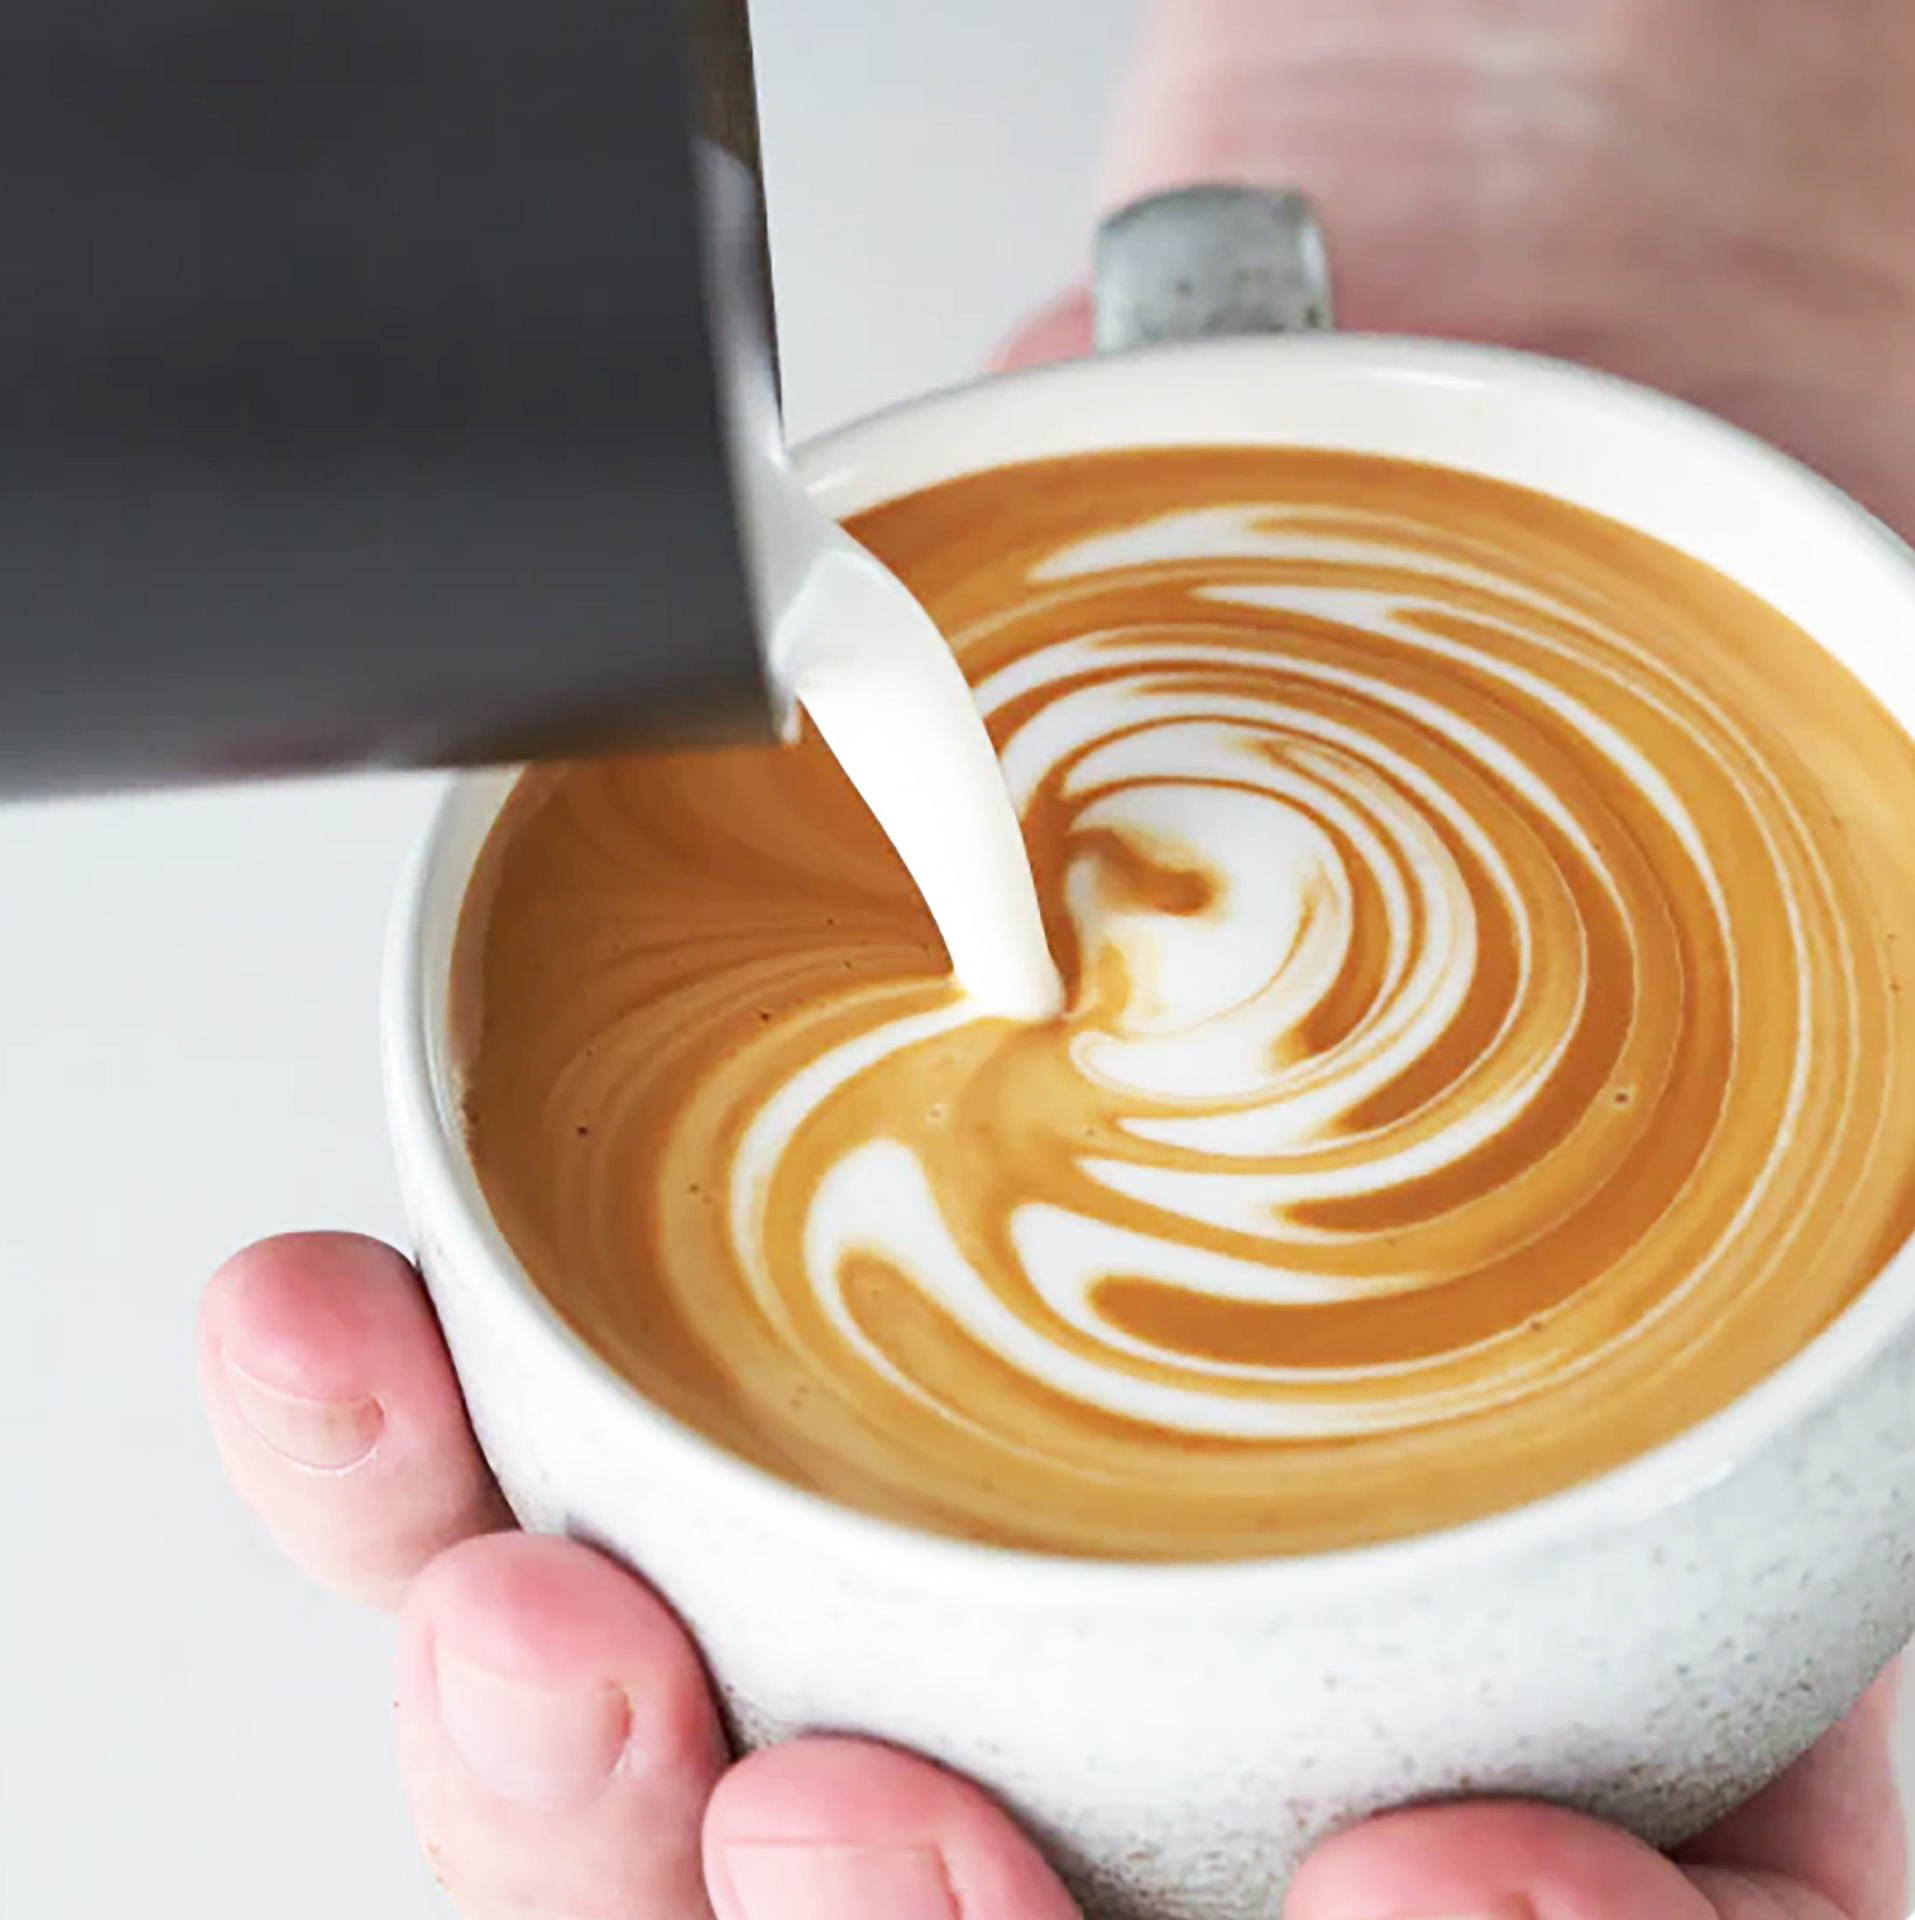 What do you think of this nanofoamer for latte art?